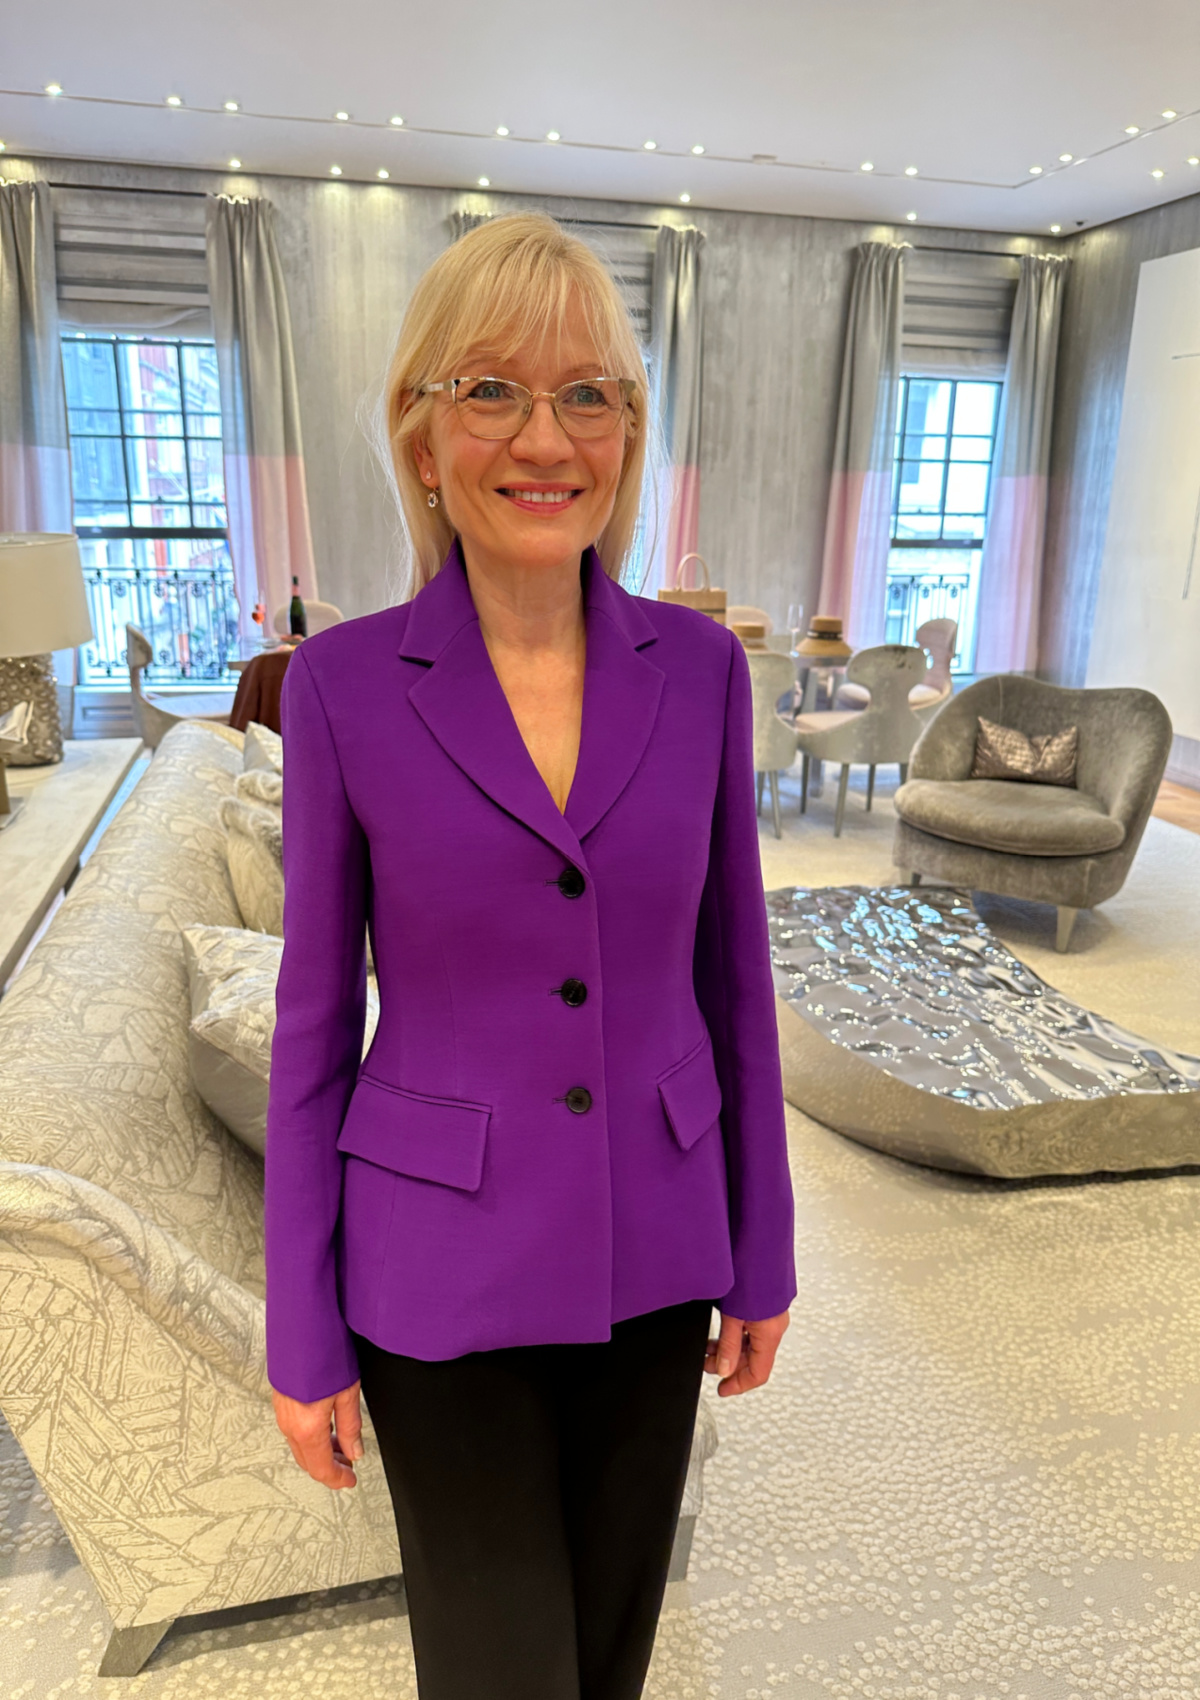 Adding colour to your wardrobe - April Harris wearing a purple Dior Bar Jacket